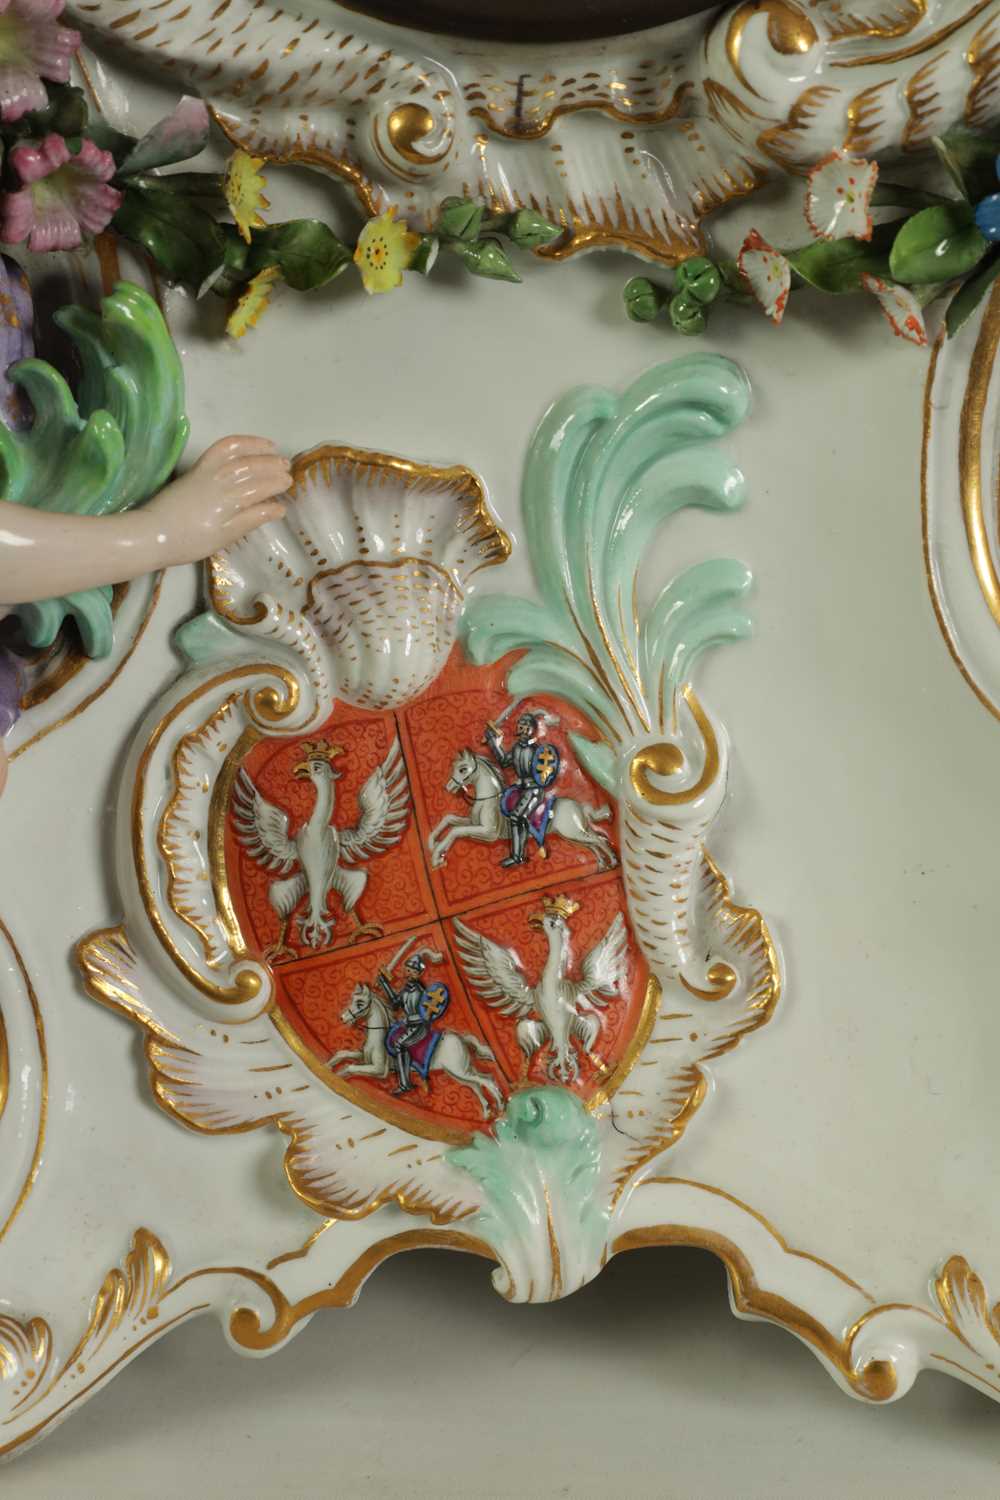 AN IMPRESSIVE MID/LATE 19TH CENTURY MEISSEN MANTEL CLOCK OF LARGE SIZE - Image 10 of 22